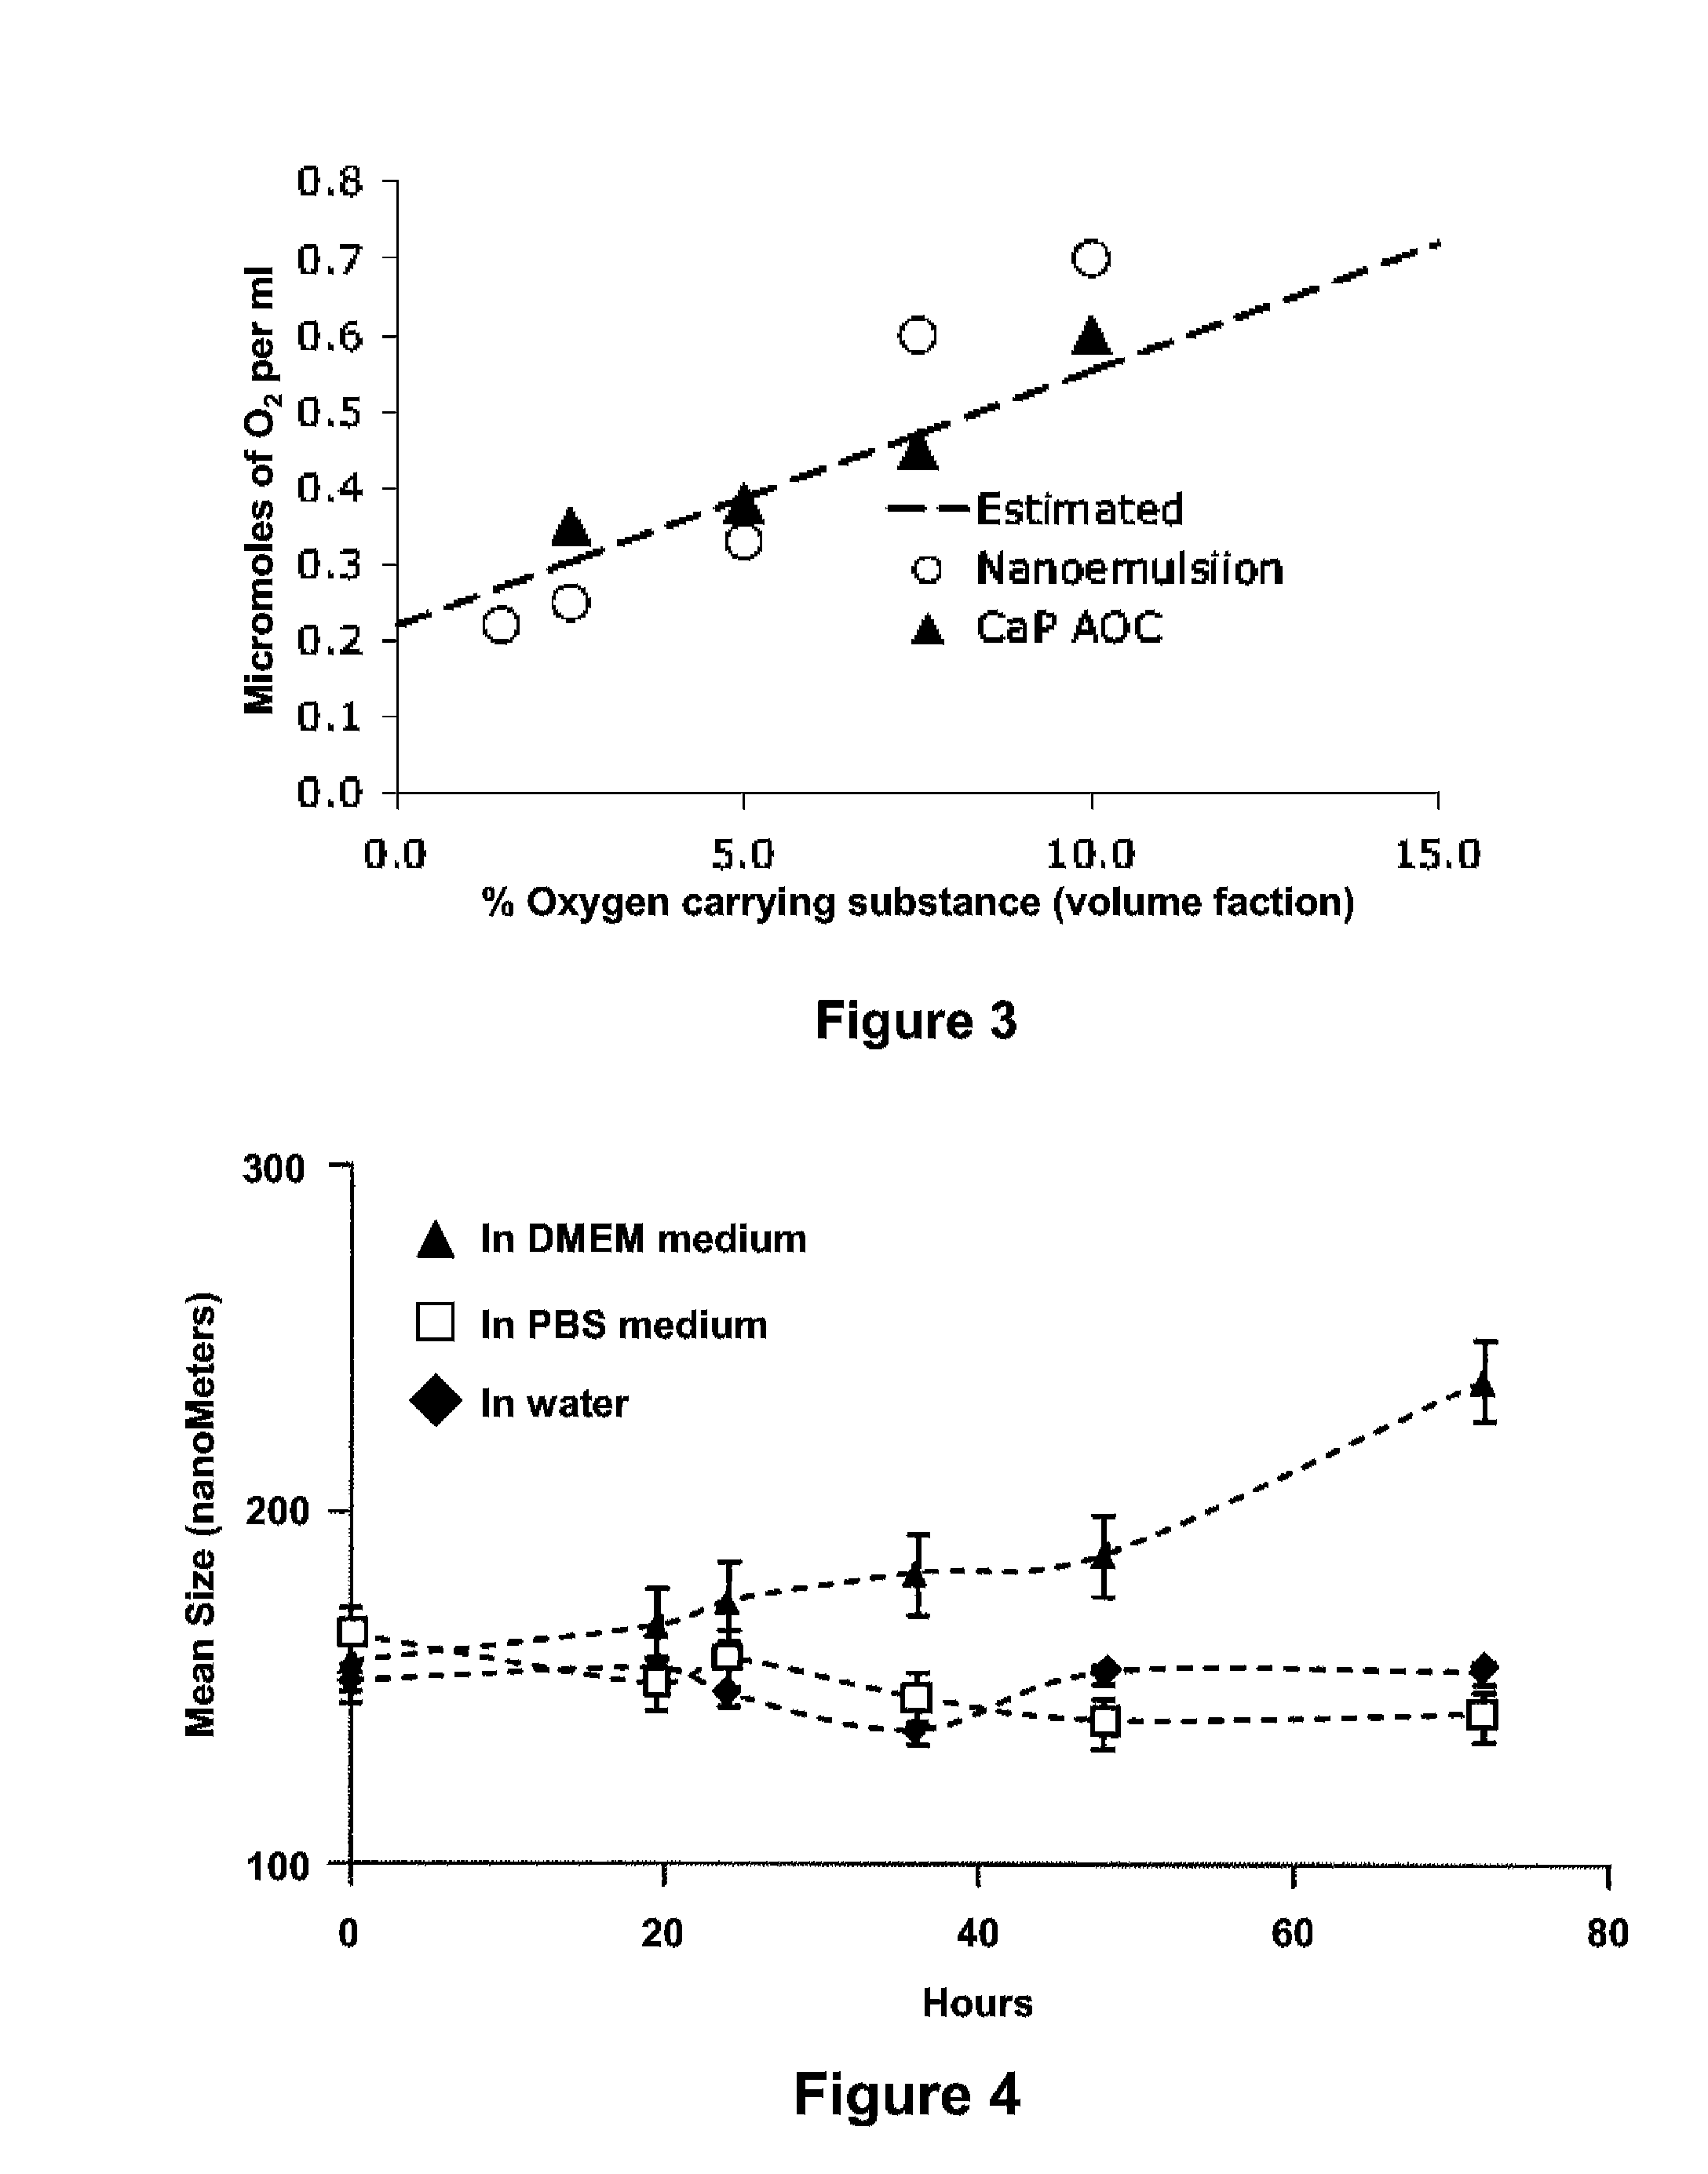 Synthesis Of Oxygen Carrying, Turbulence Resistant, High Density Submicron Particulates